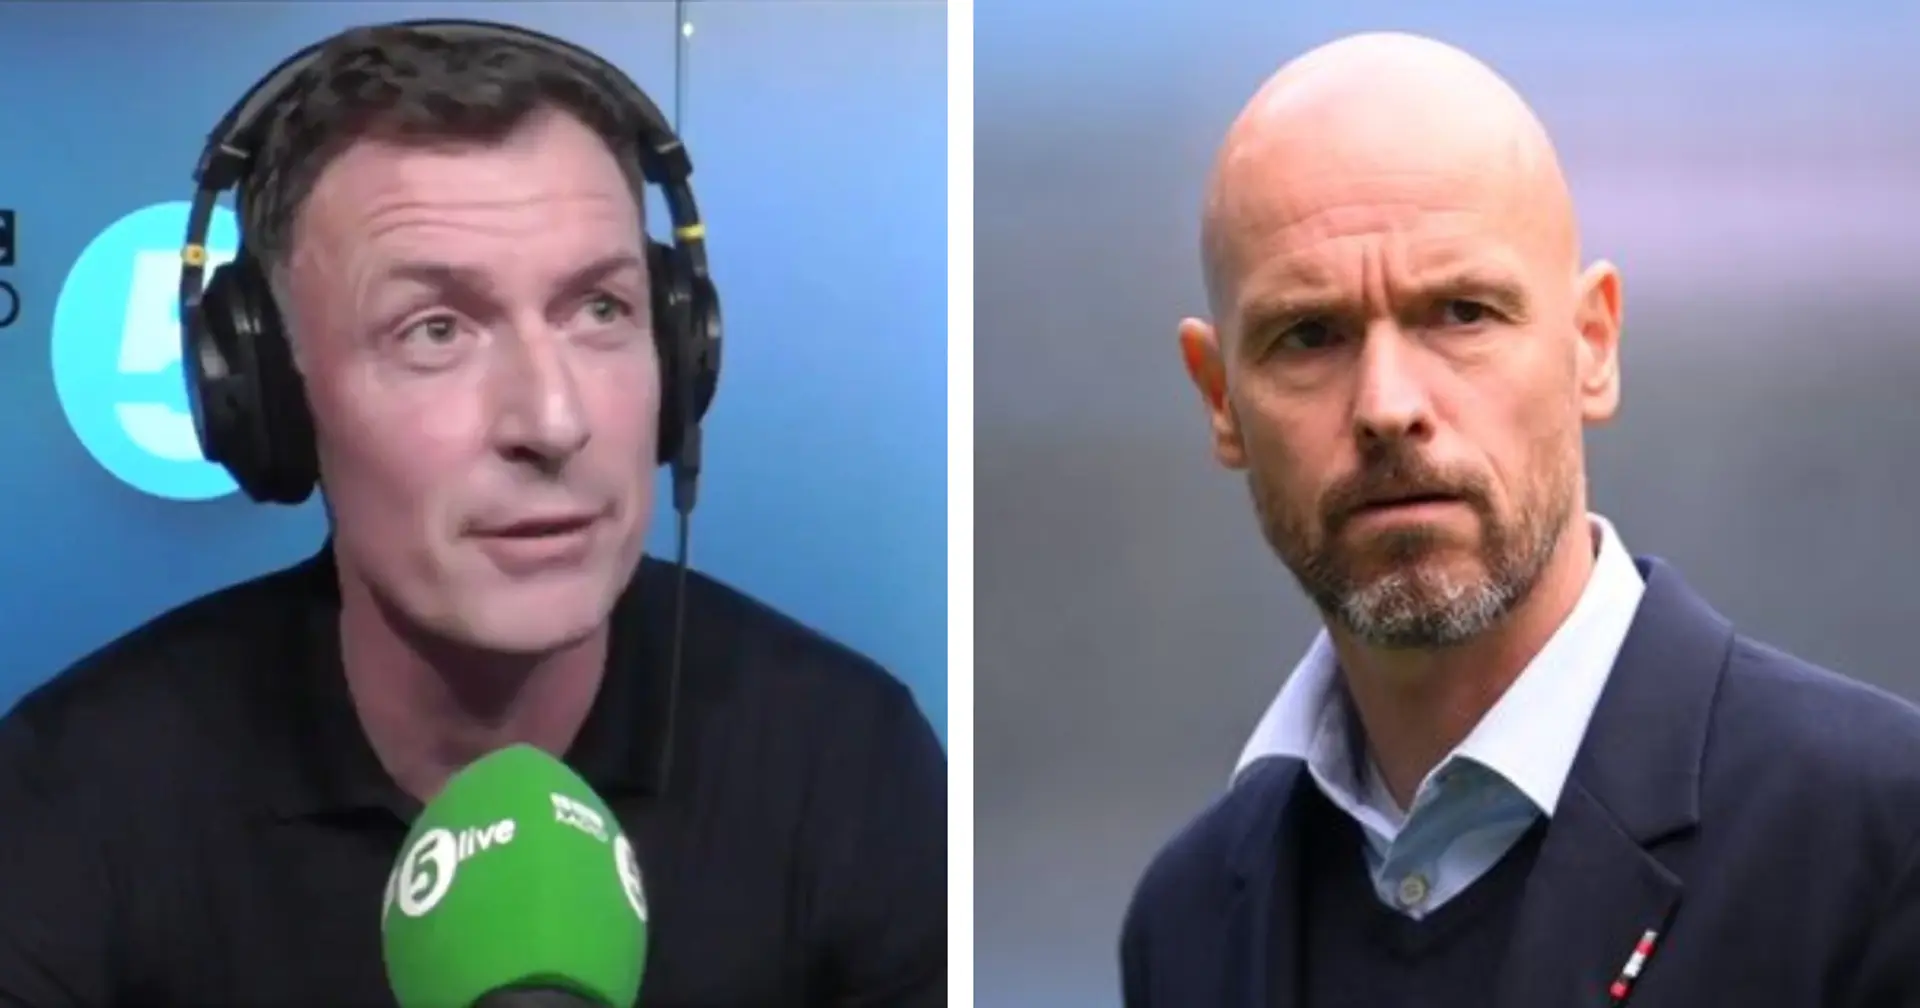 'I don't think Man United will win this': Chris Sutton makes Newcastle clash prediction